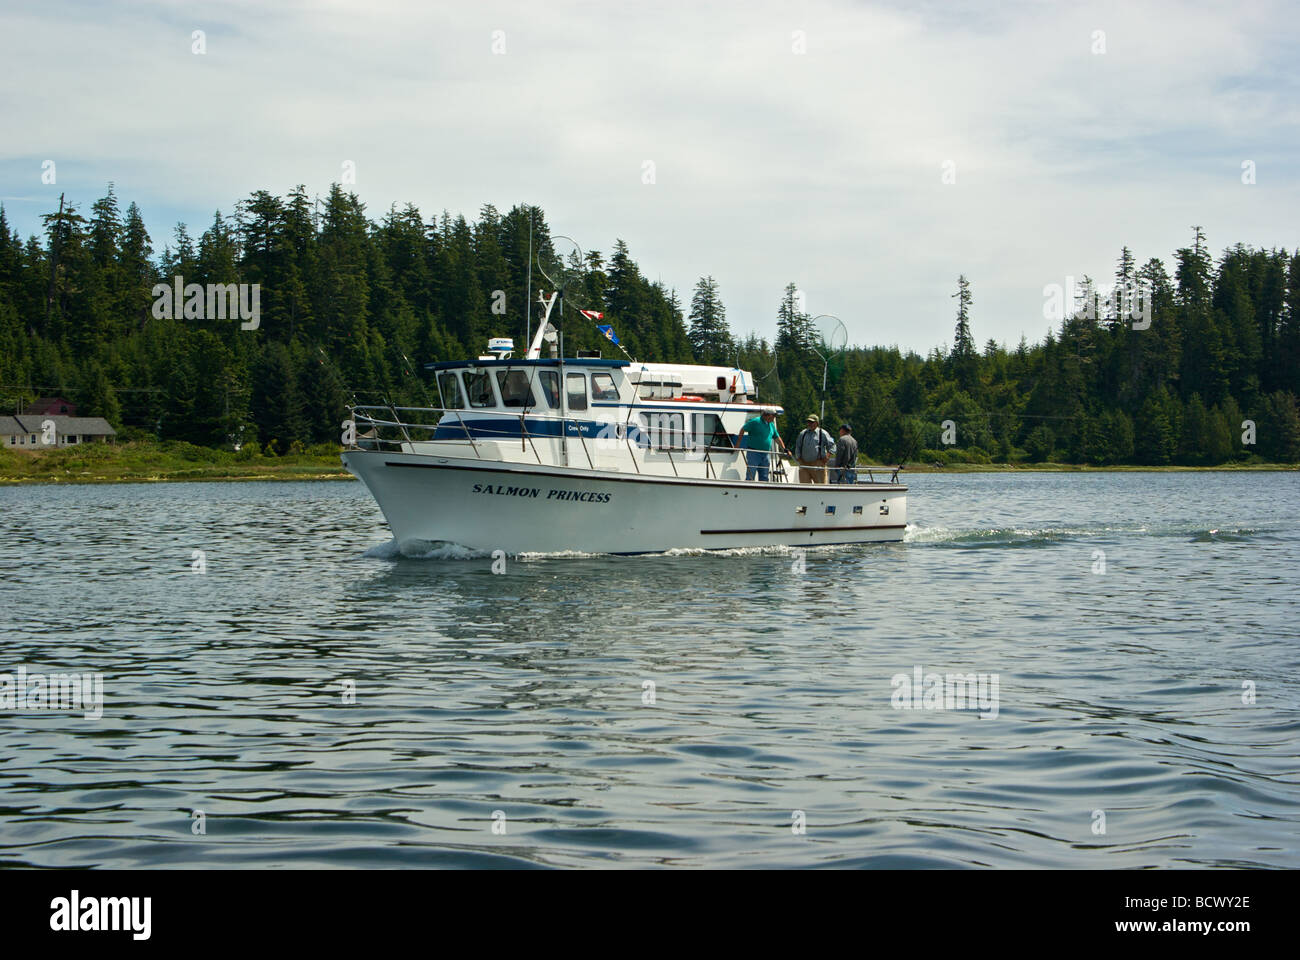 https://c8.alamy.com/comp/BCWY2E/drift-jigging-party-charter-boat-returning-to-ucluelet-port-after-BCWY2E.jpg